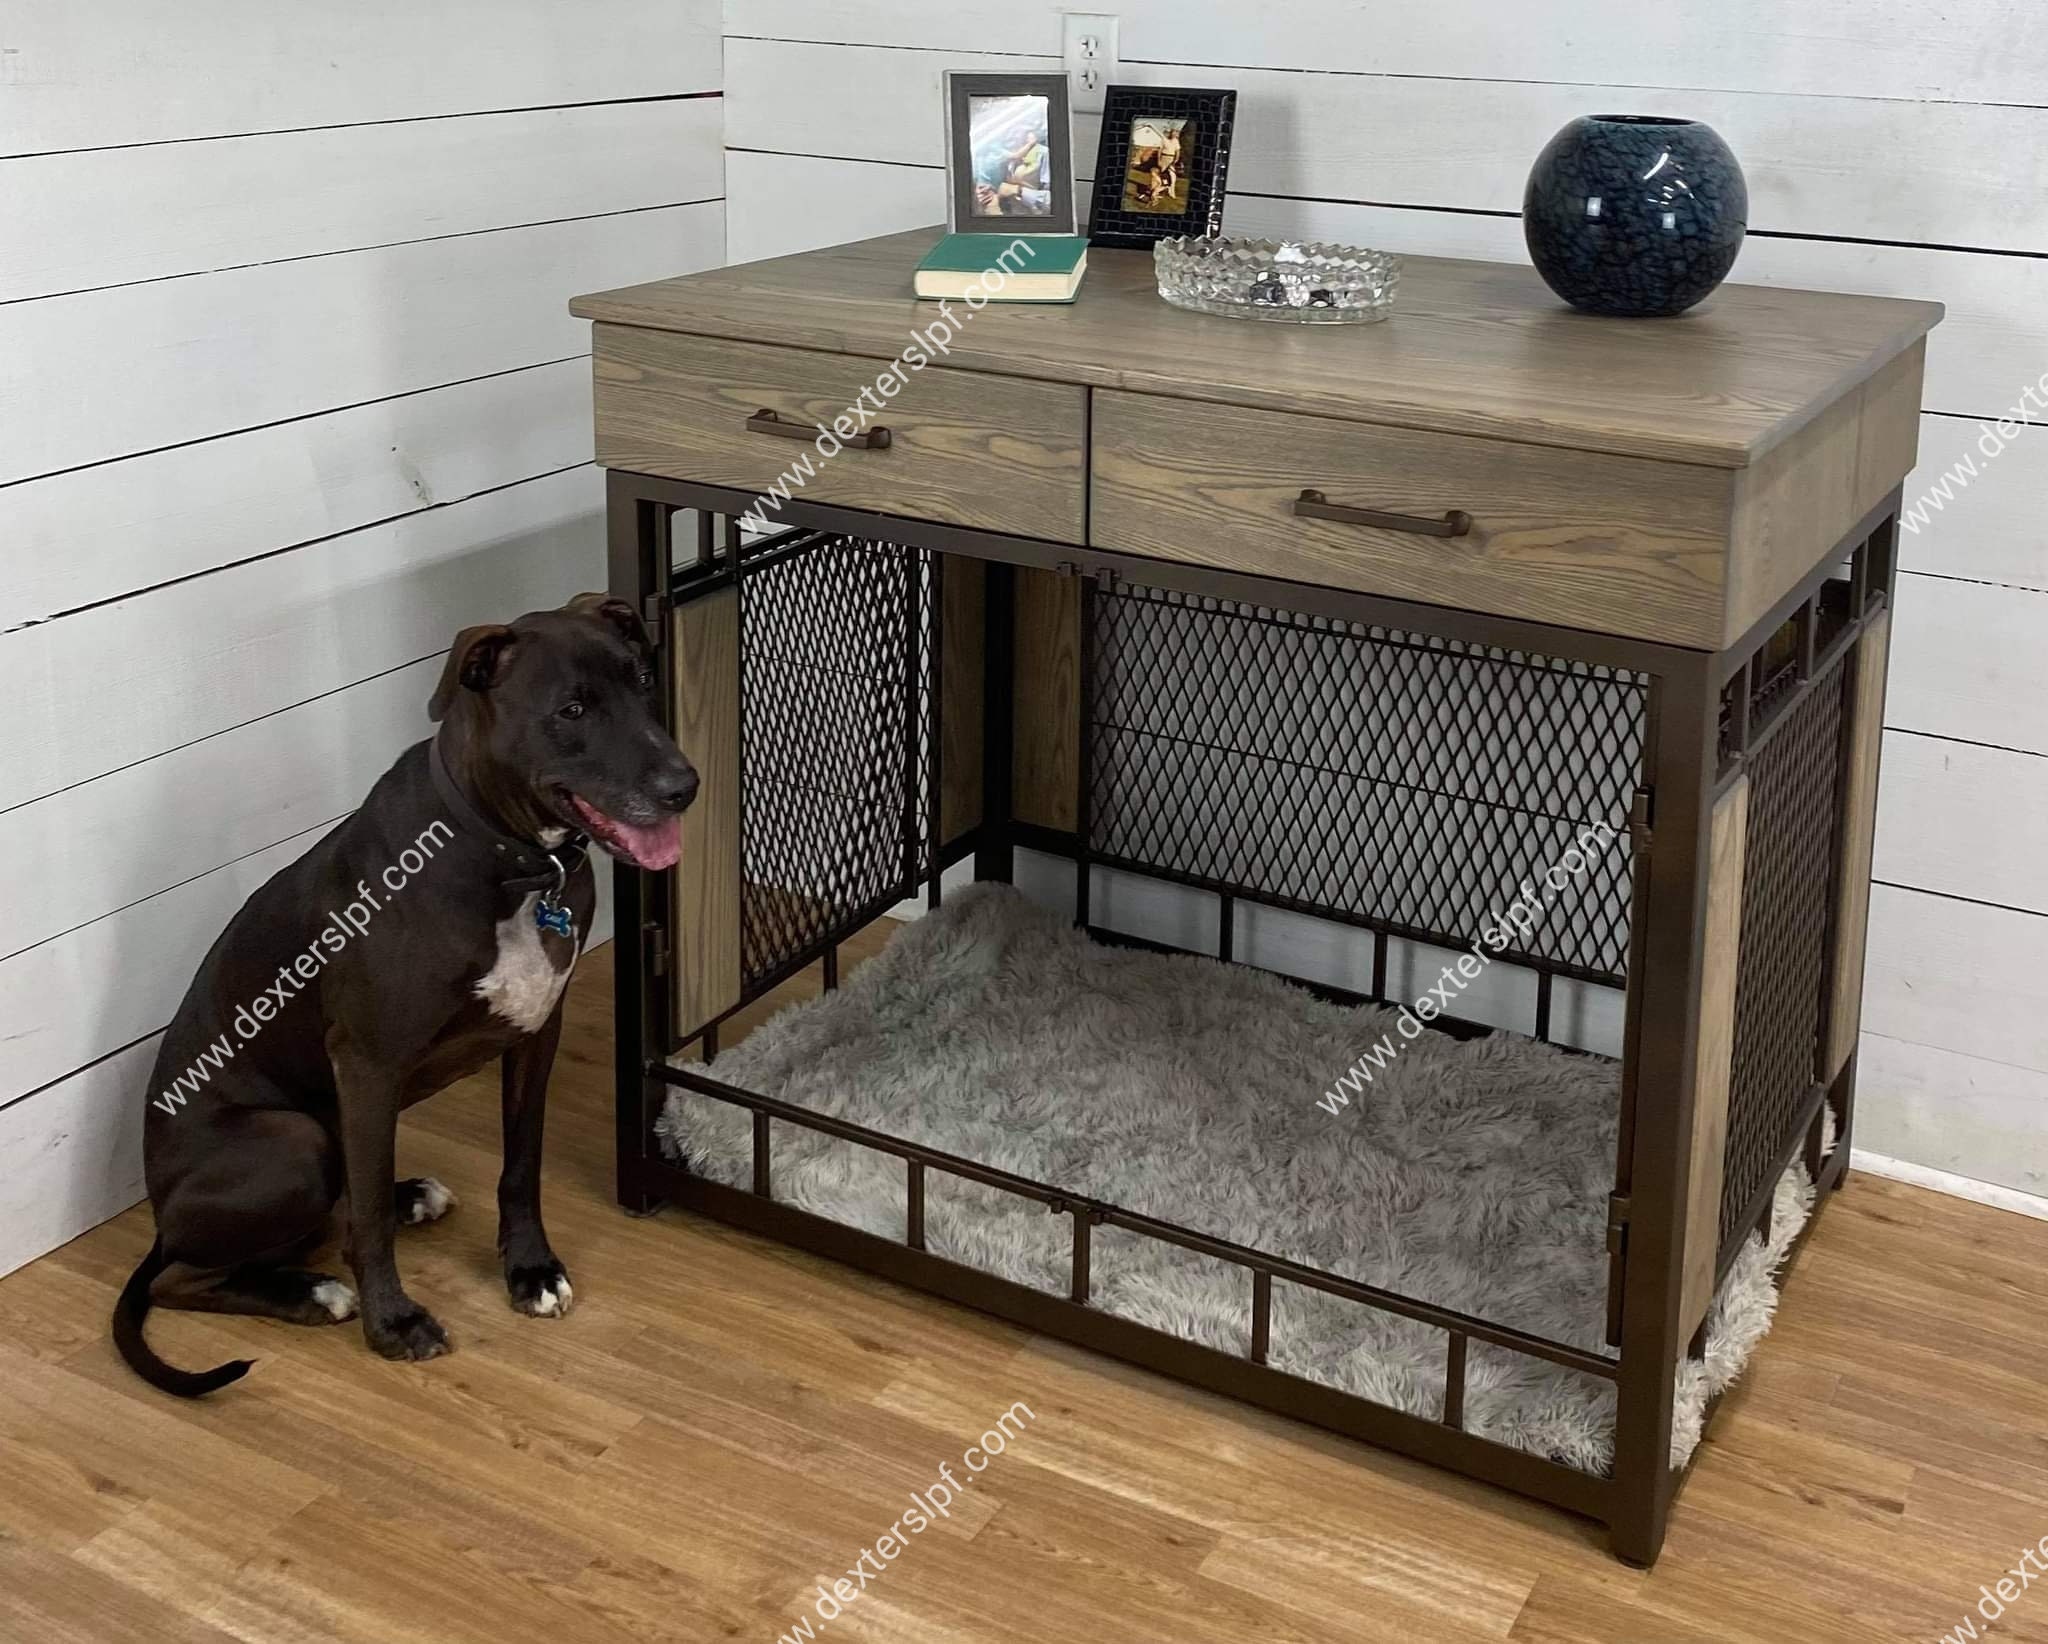 Wood Furniture Dog Cave House Wire Dog Crate Kennel Cage with Double Lockable Doors Indoor Chew-Proof Brown-1 Decorative Medium Large Pet Crate End Table 